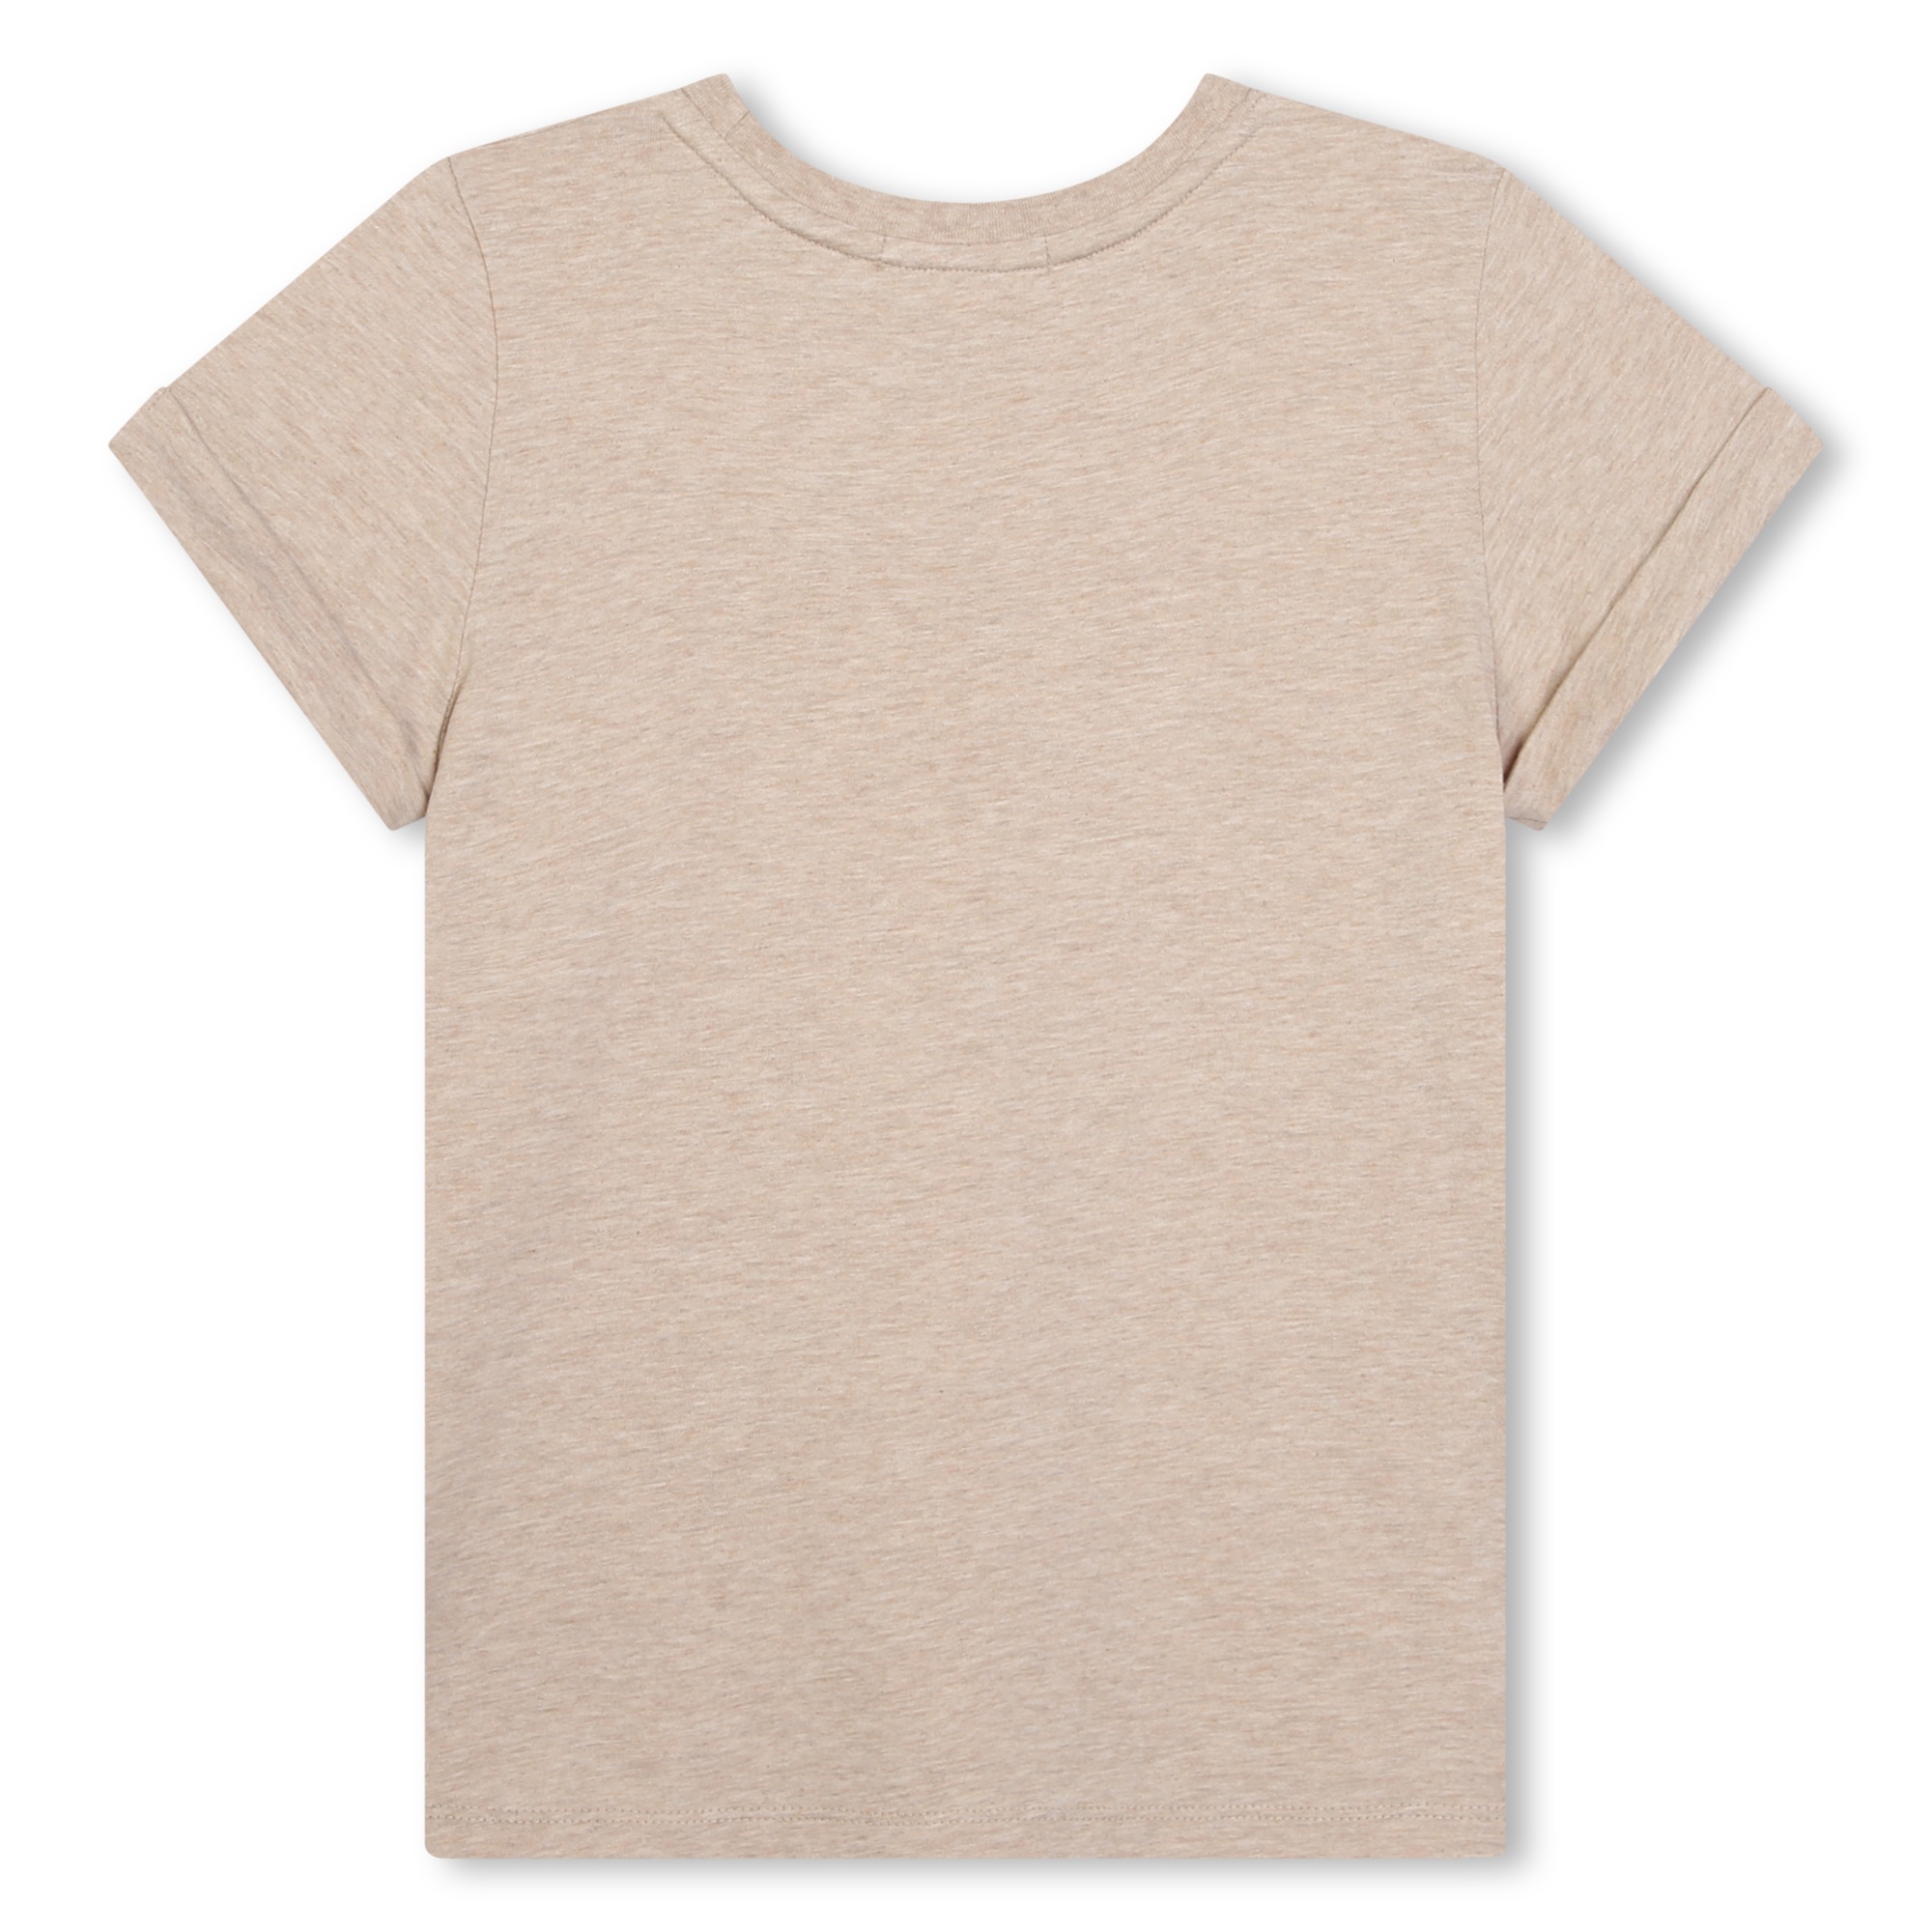 Heathered cotton T-shirt CHLOE for GIRL